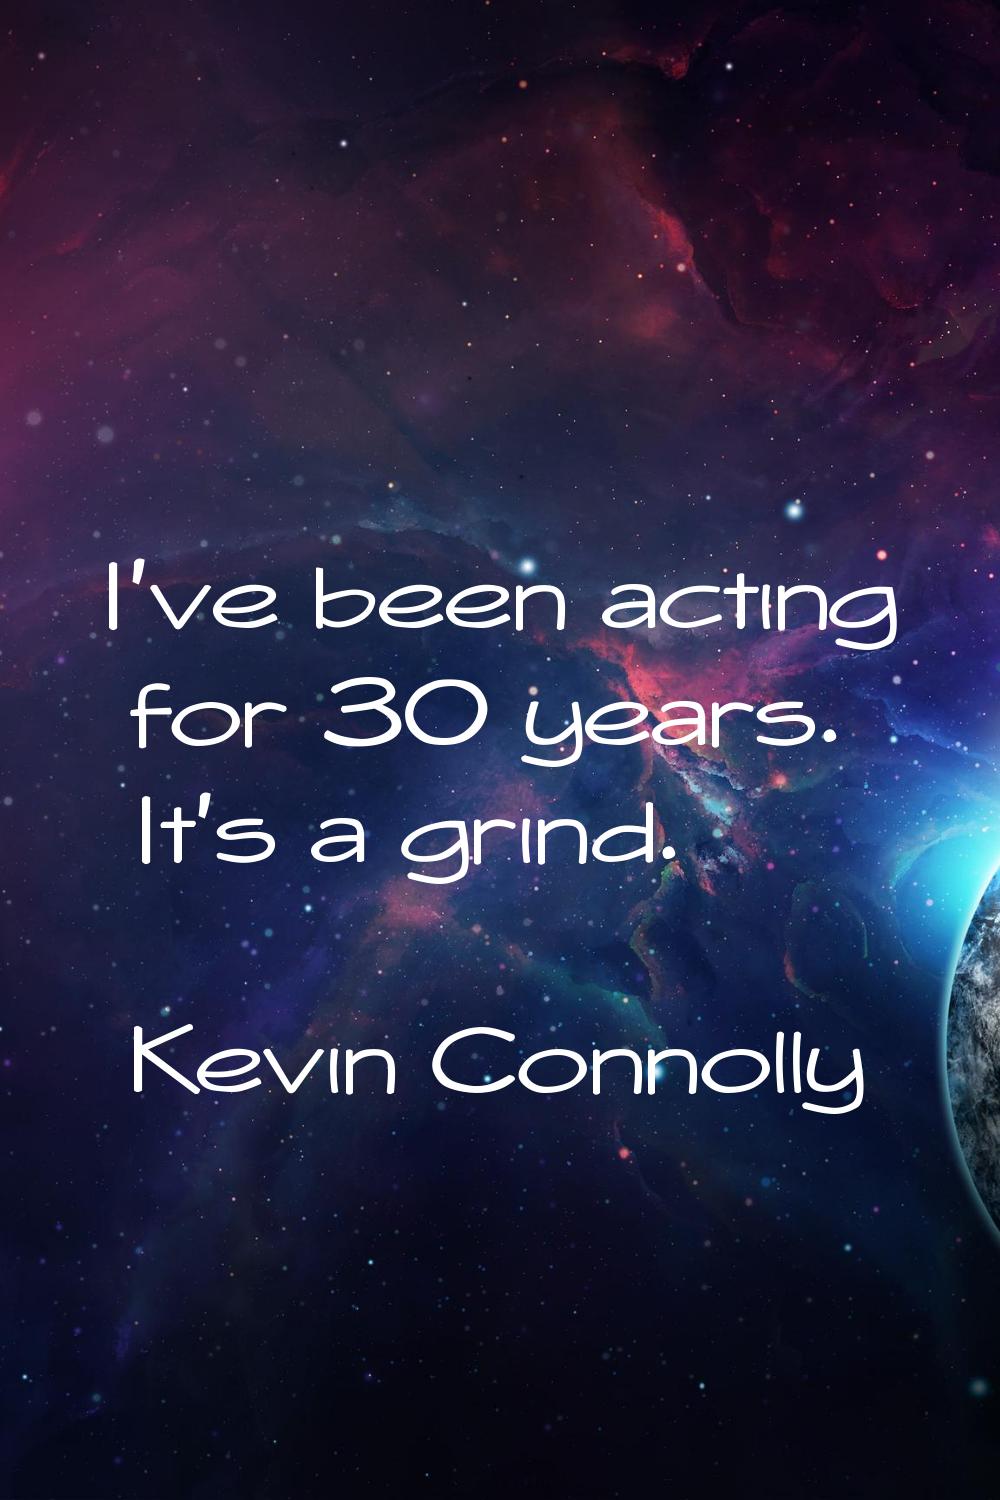 I've been acting for 30 years. It's a grind.